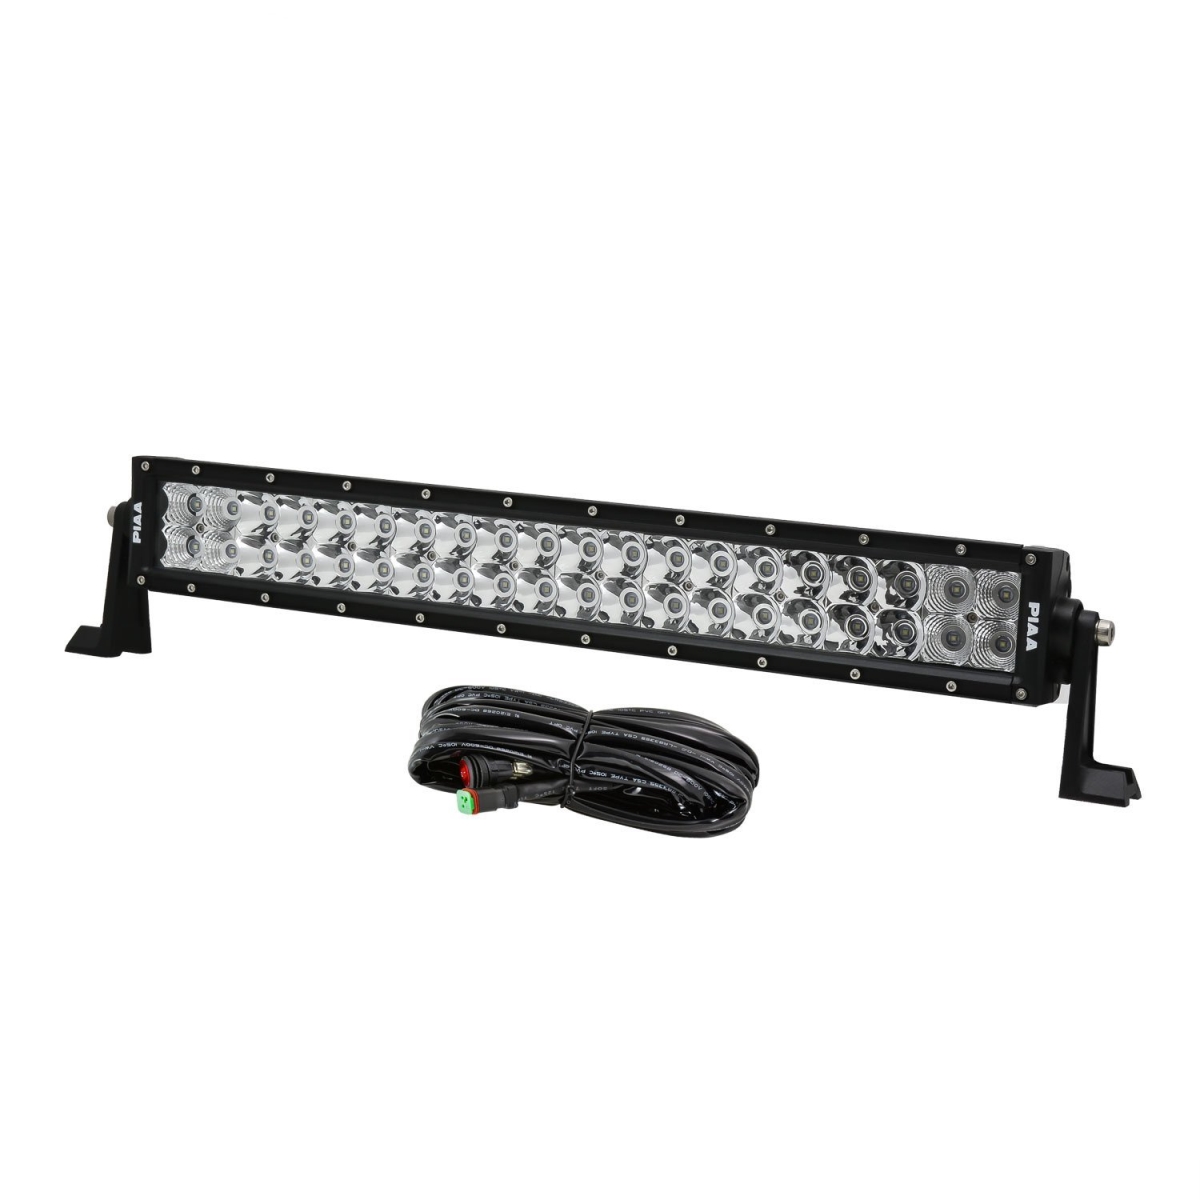 Picture of Piaa P27-2606120 20 ft. 120W Quad Series Black Dual Row LED Light Bar Kit In Combo Beam